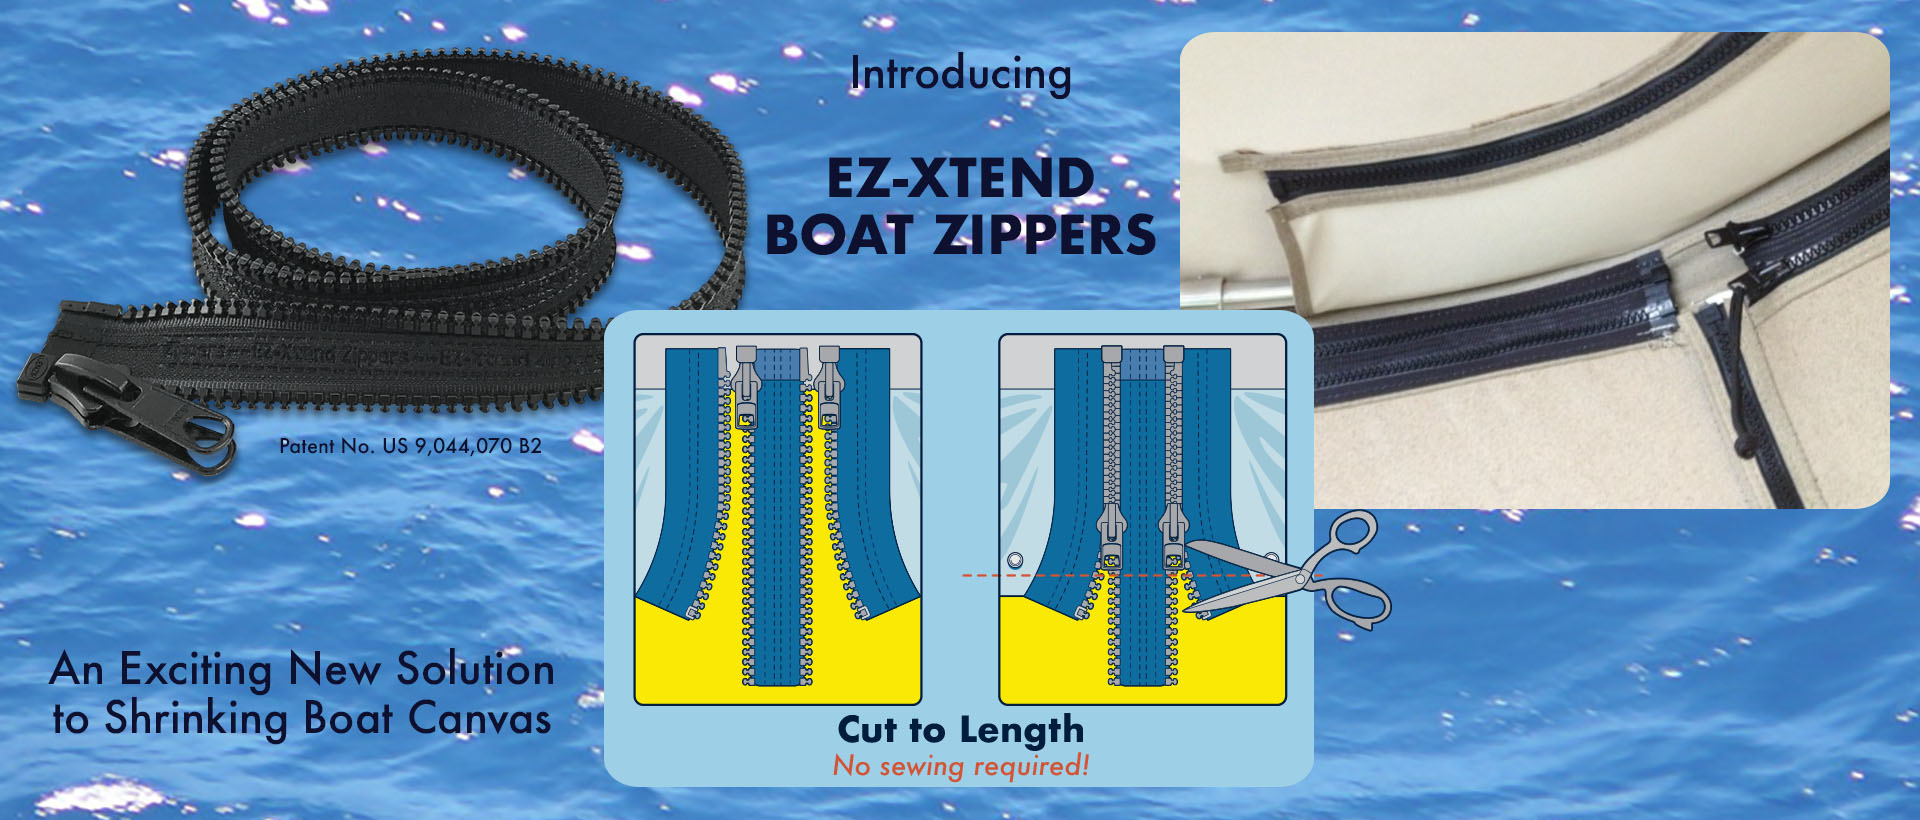 ez-xtend boat zippers canvas-boat-cover-and-repair